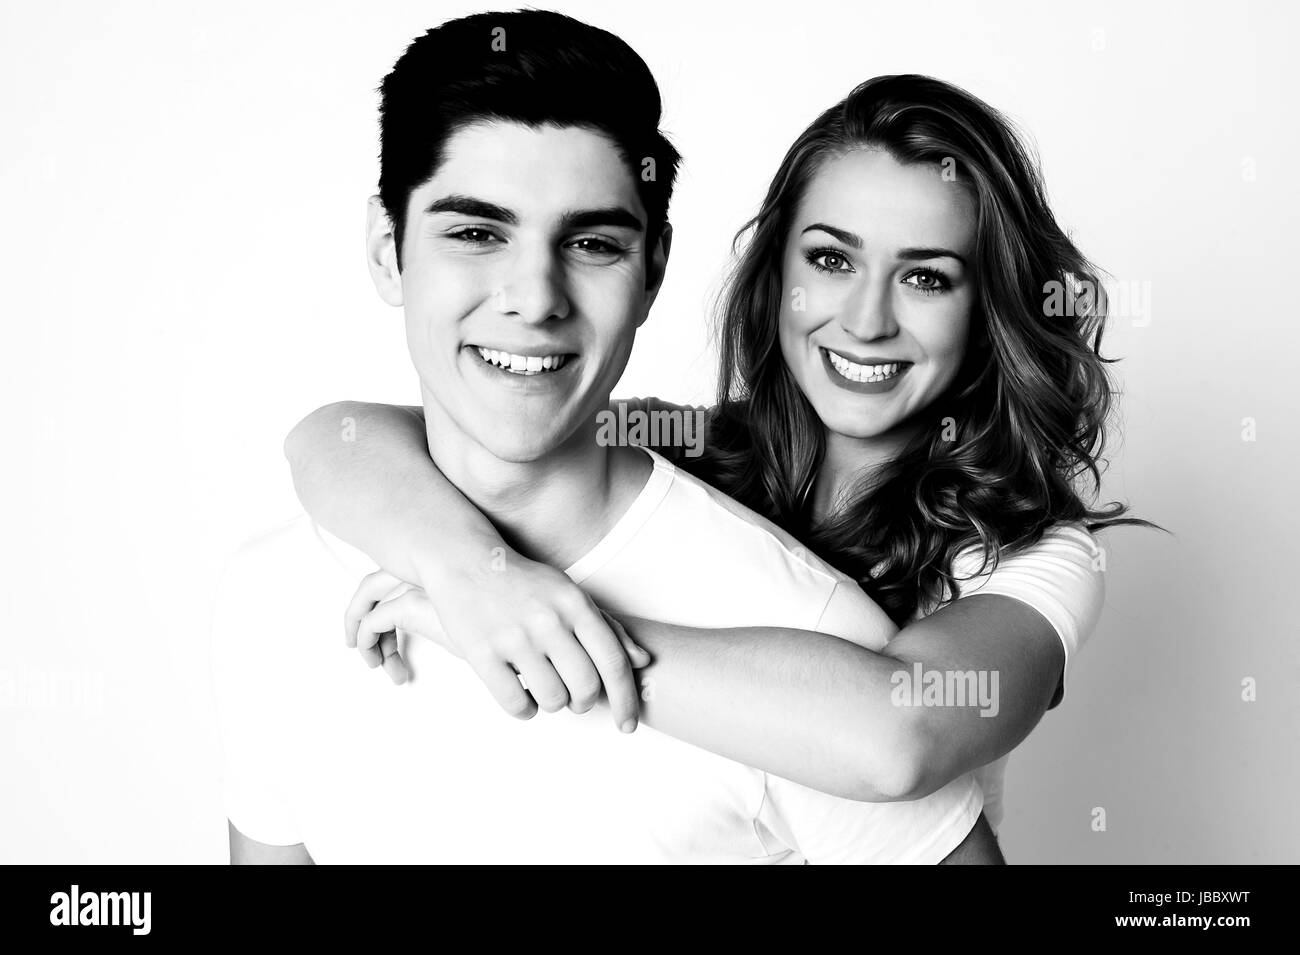 Black and white image of a happy romantic young couple Stock Photo